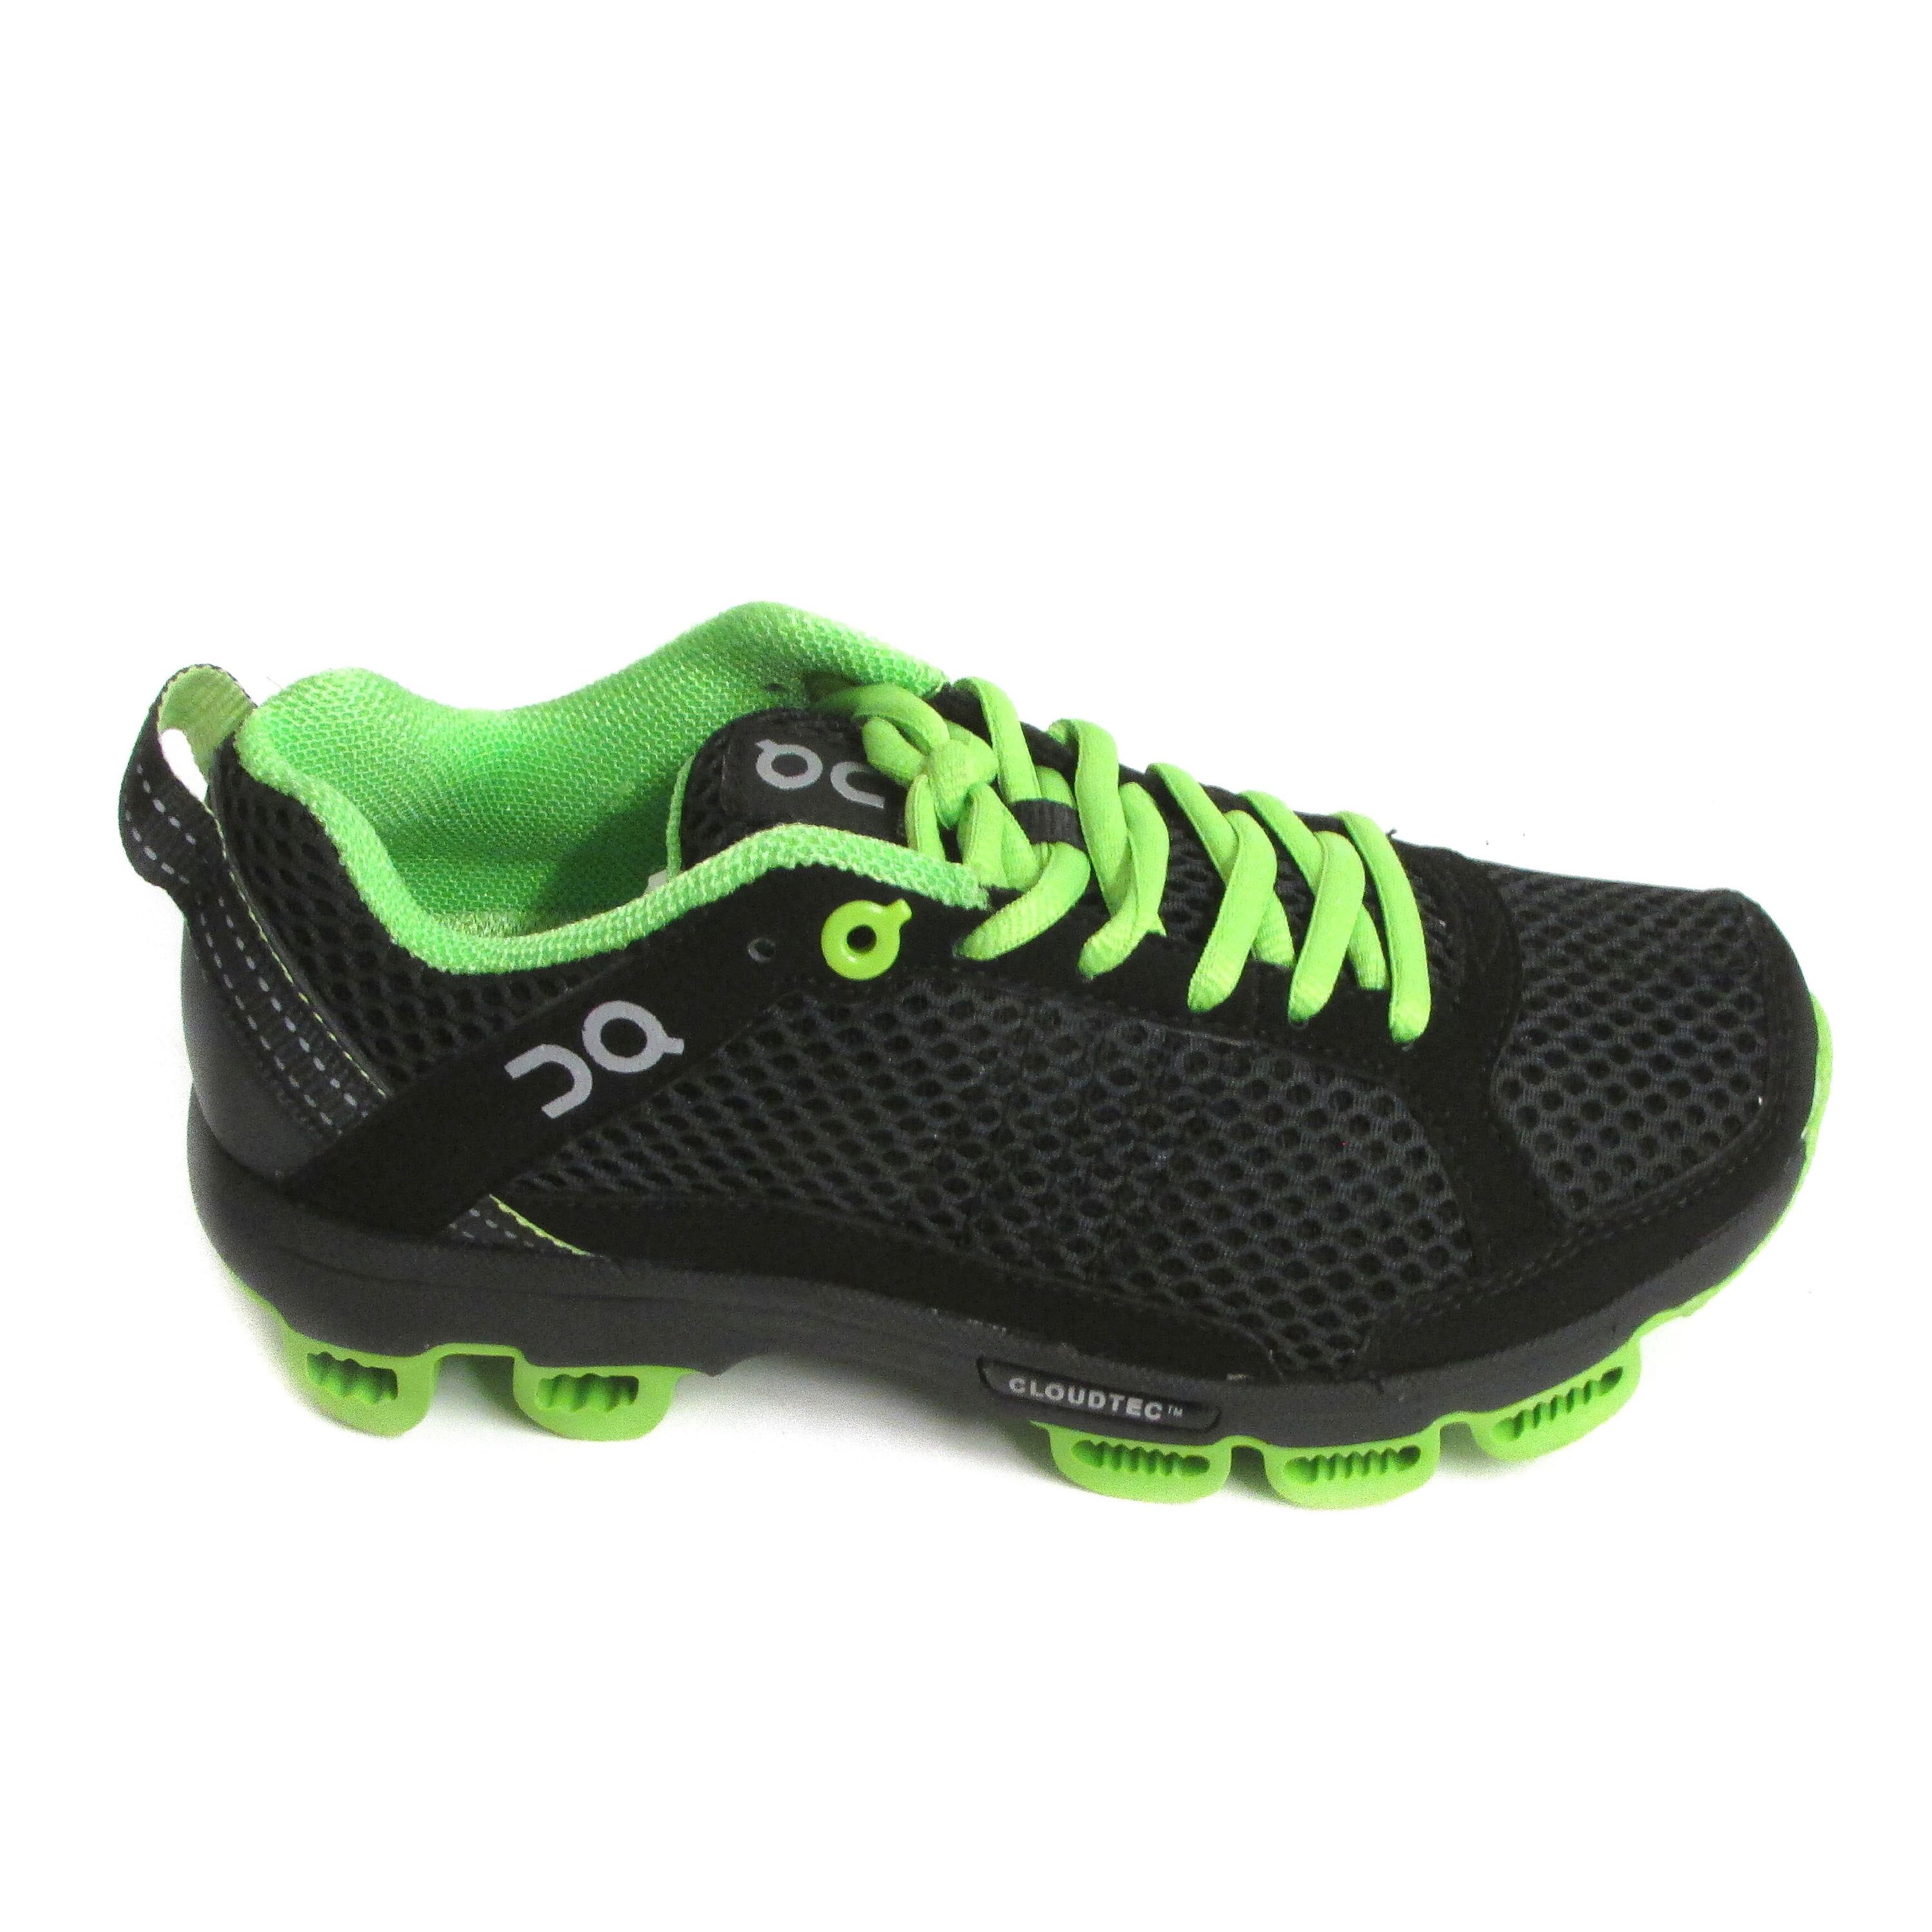 Black/ Lime Running Shoes - Overstock 